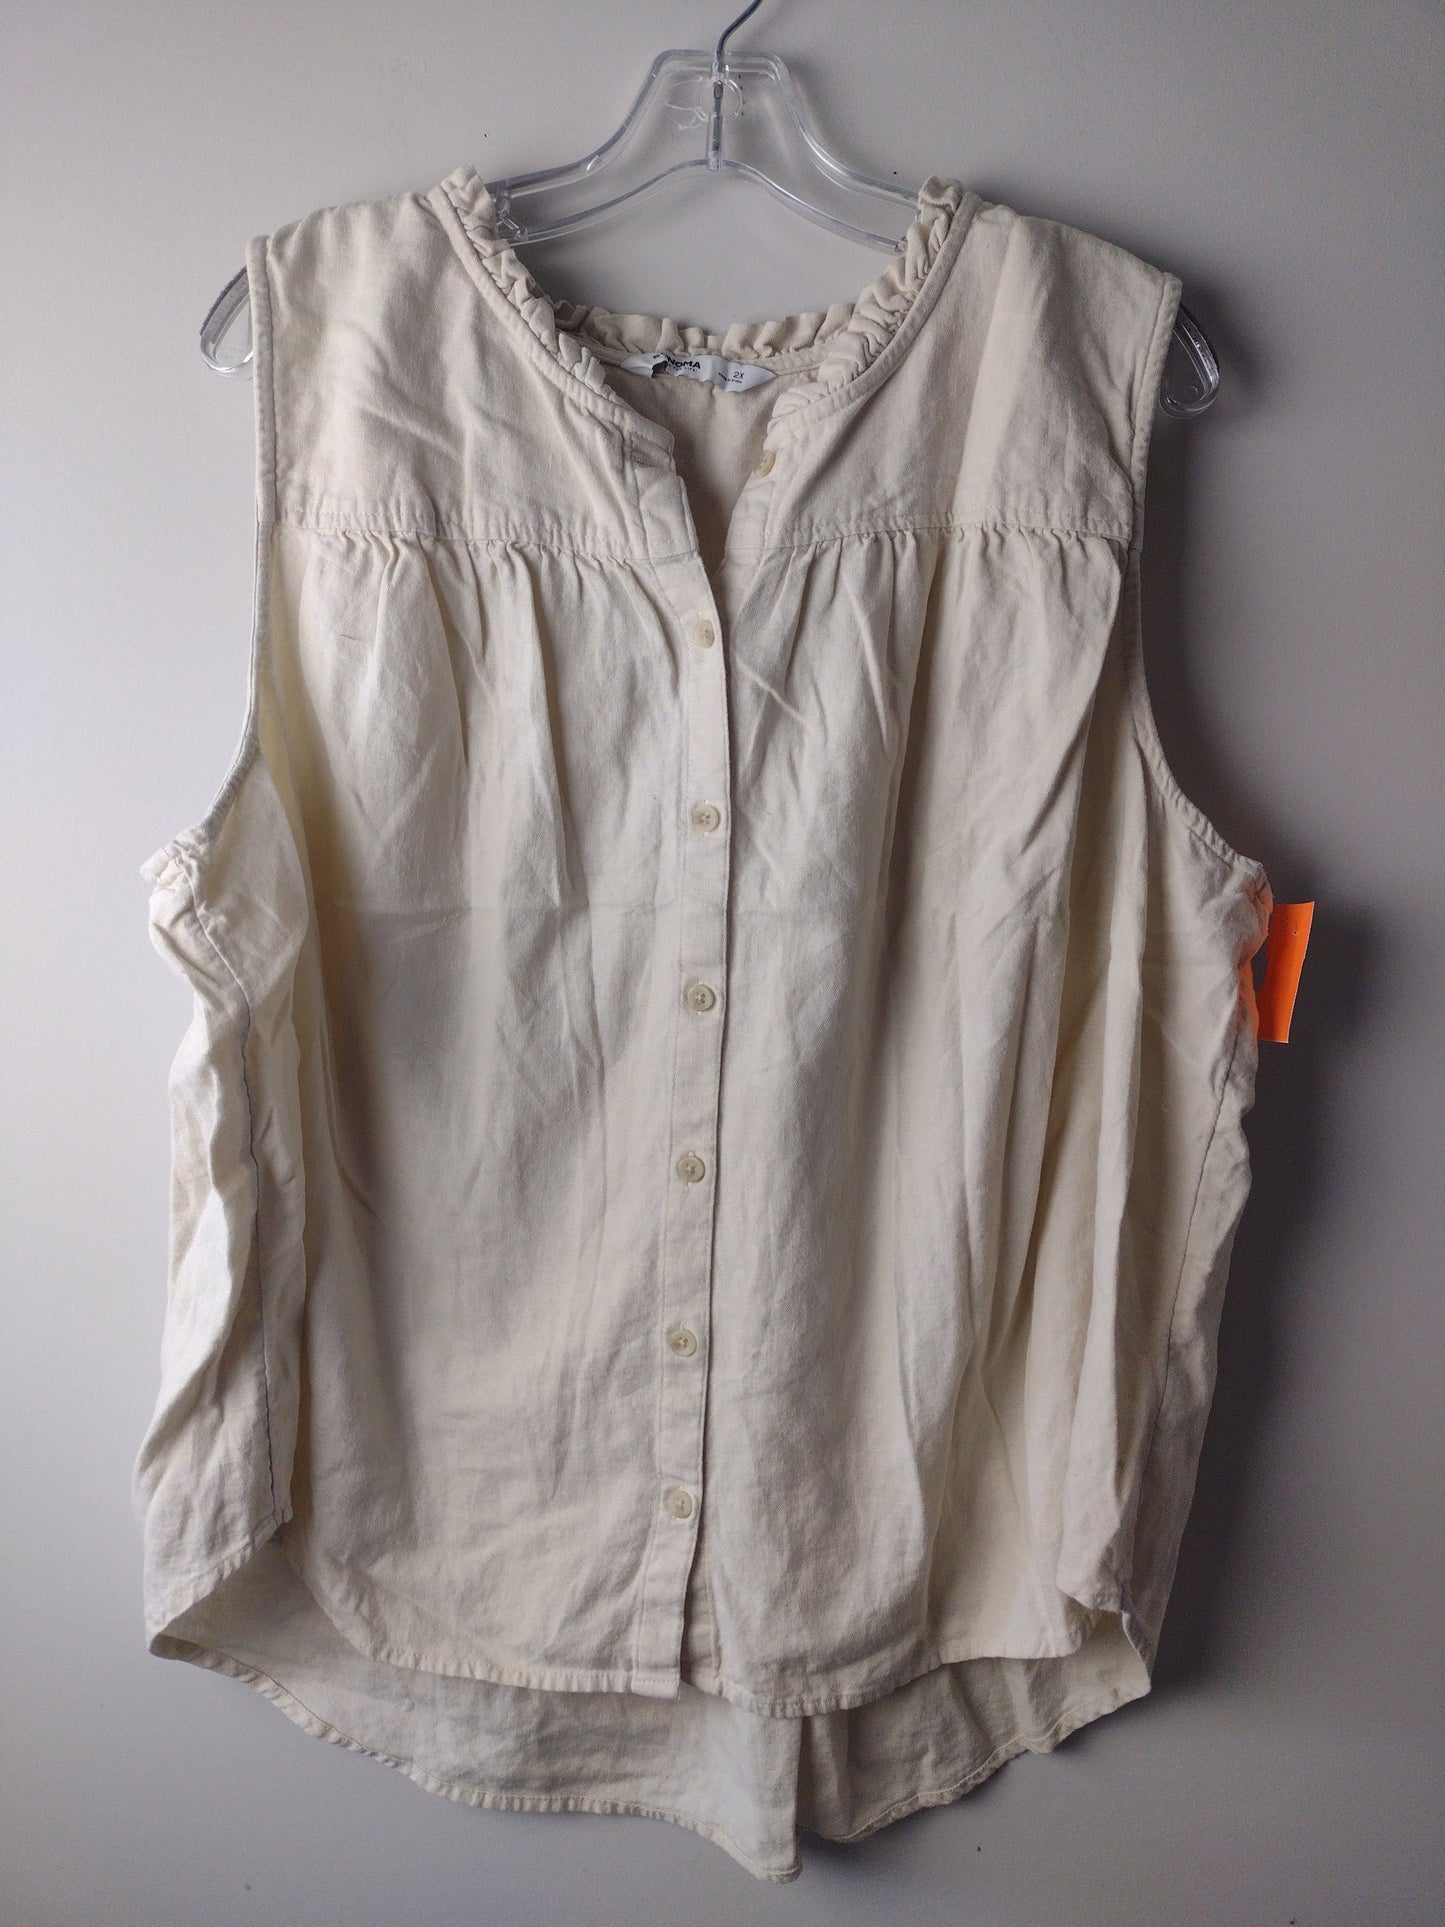 Top Sleeveless By Sonoma  Size: 2x